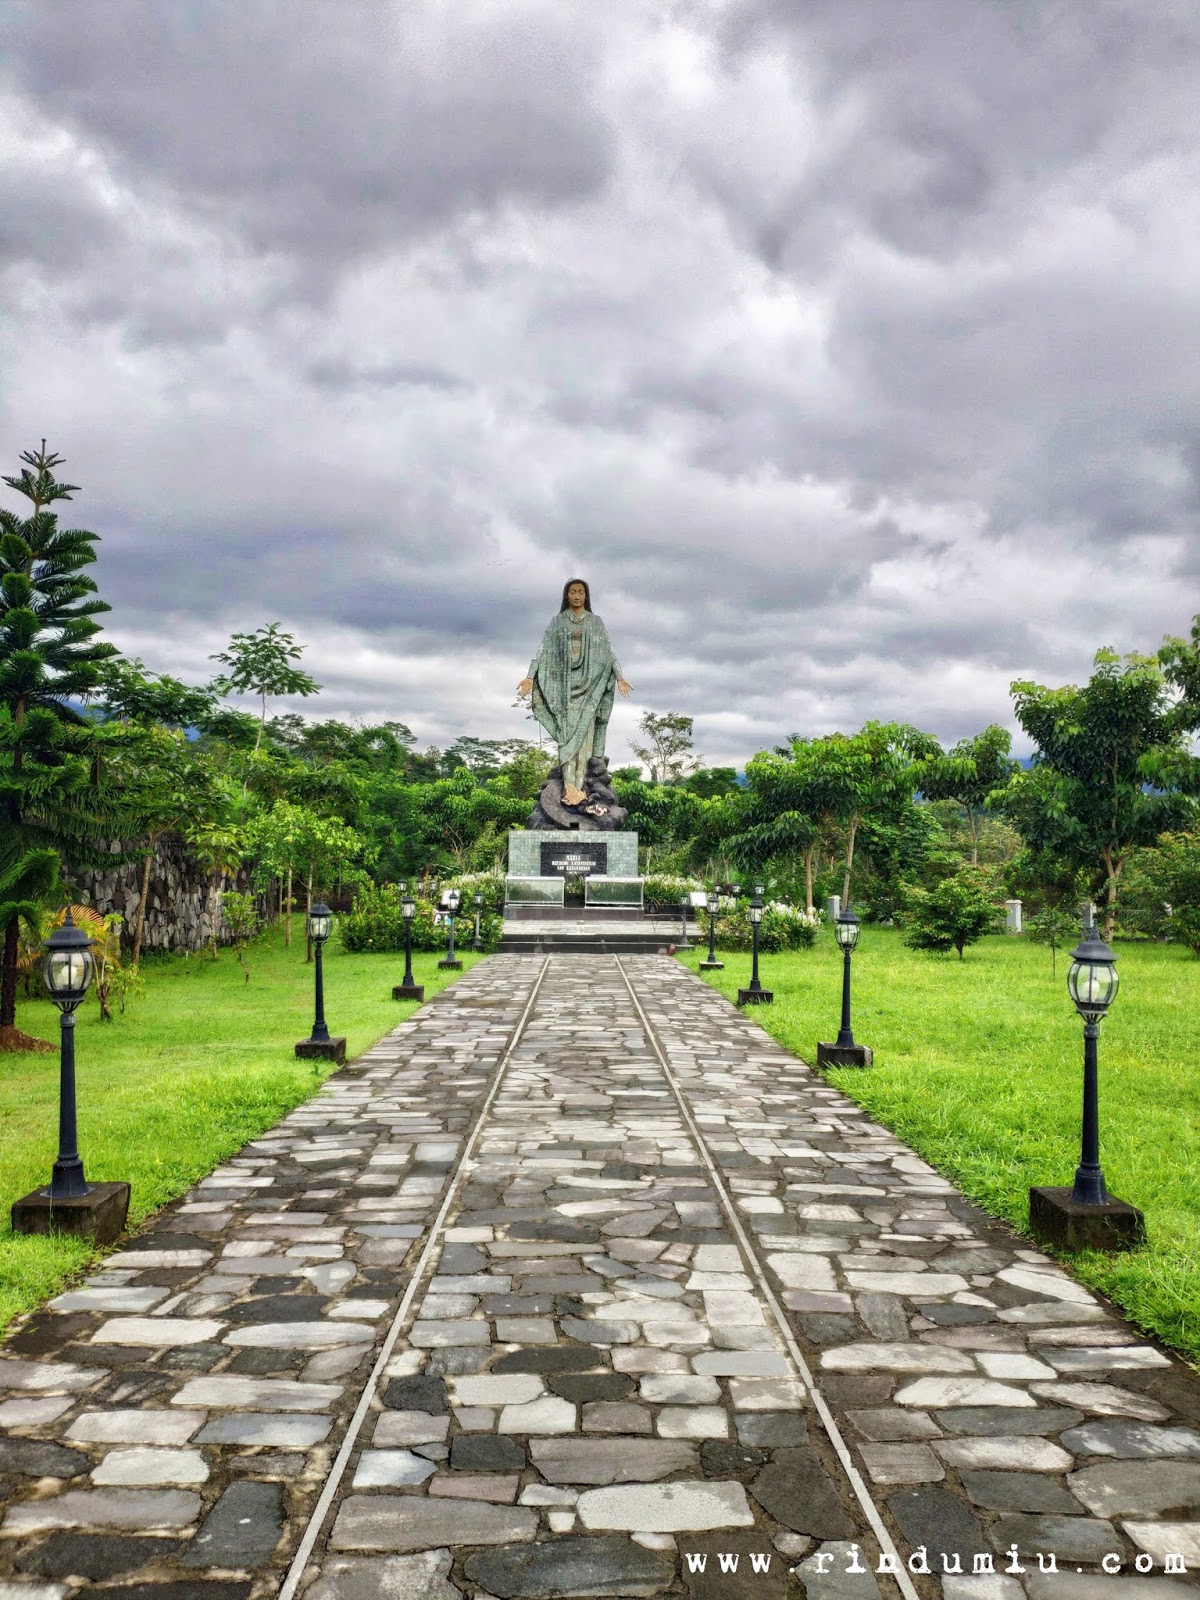 the virgin mary statue in gua maria gantang in muntilan in the north of jogja